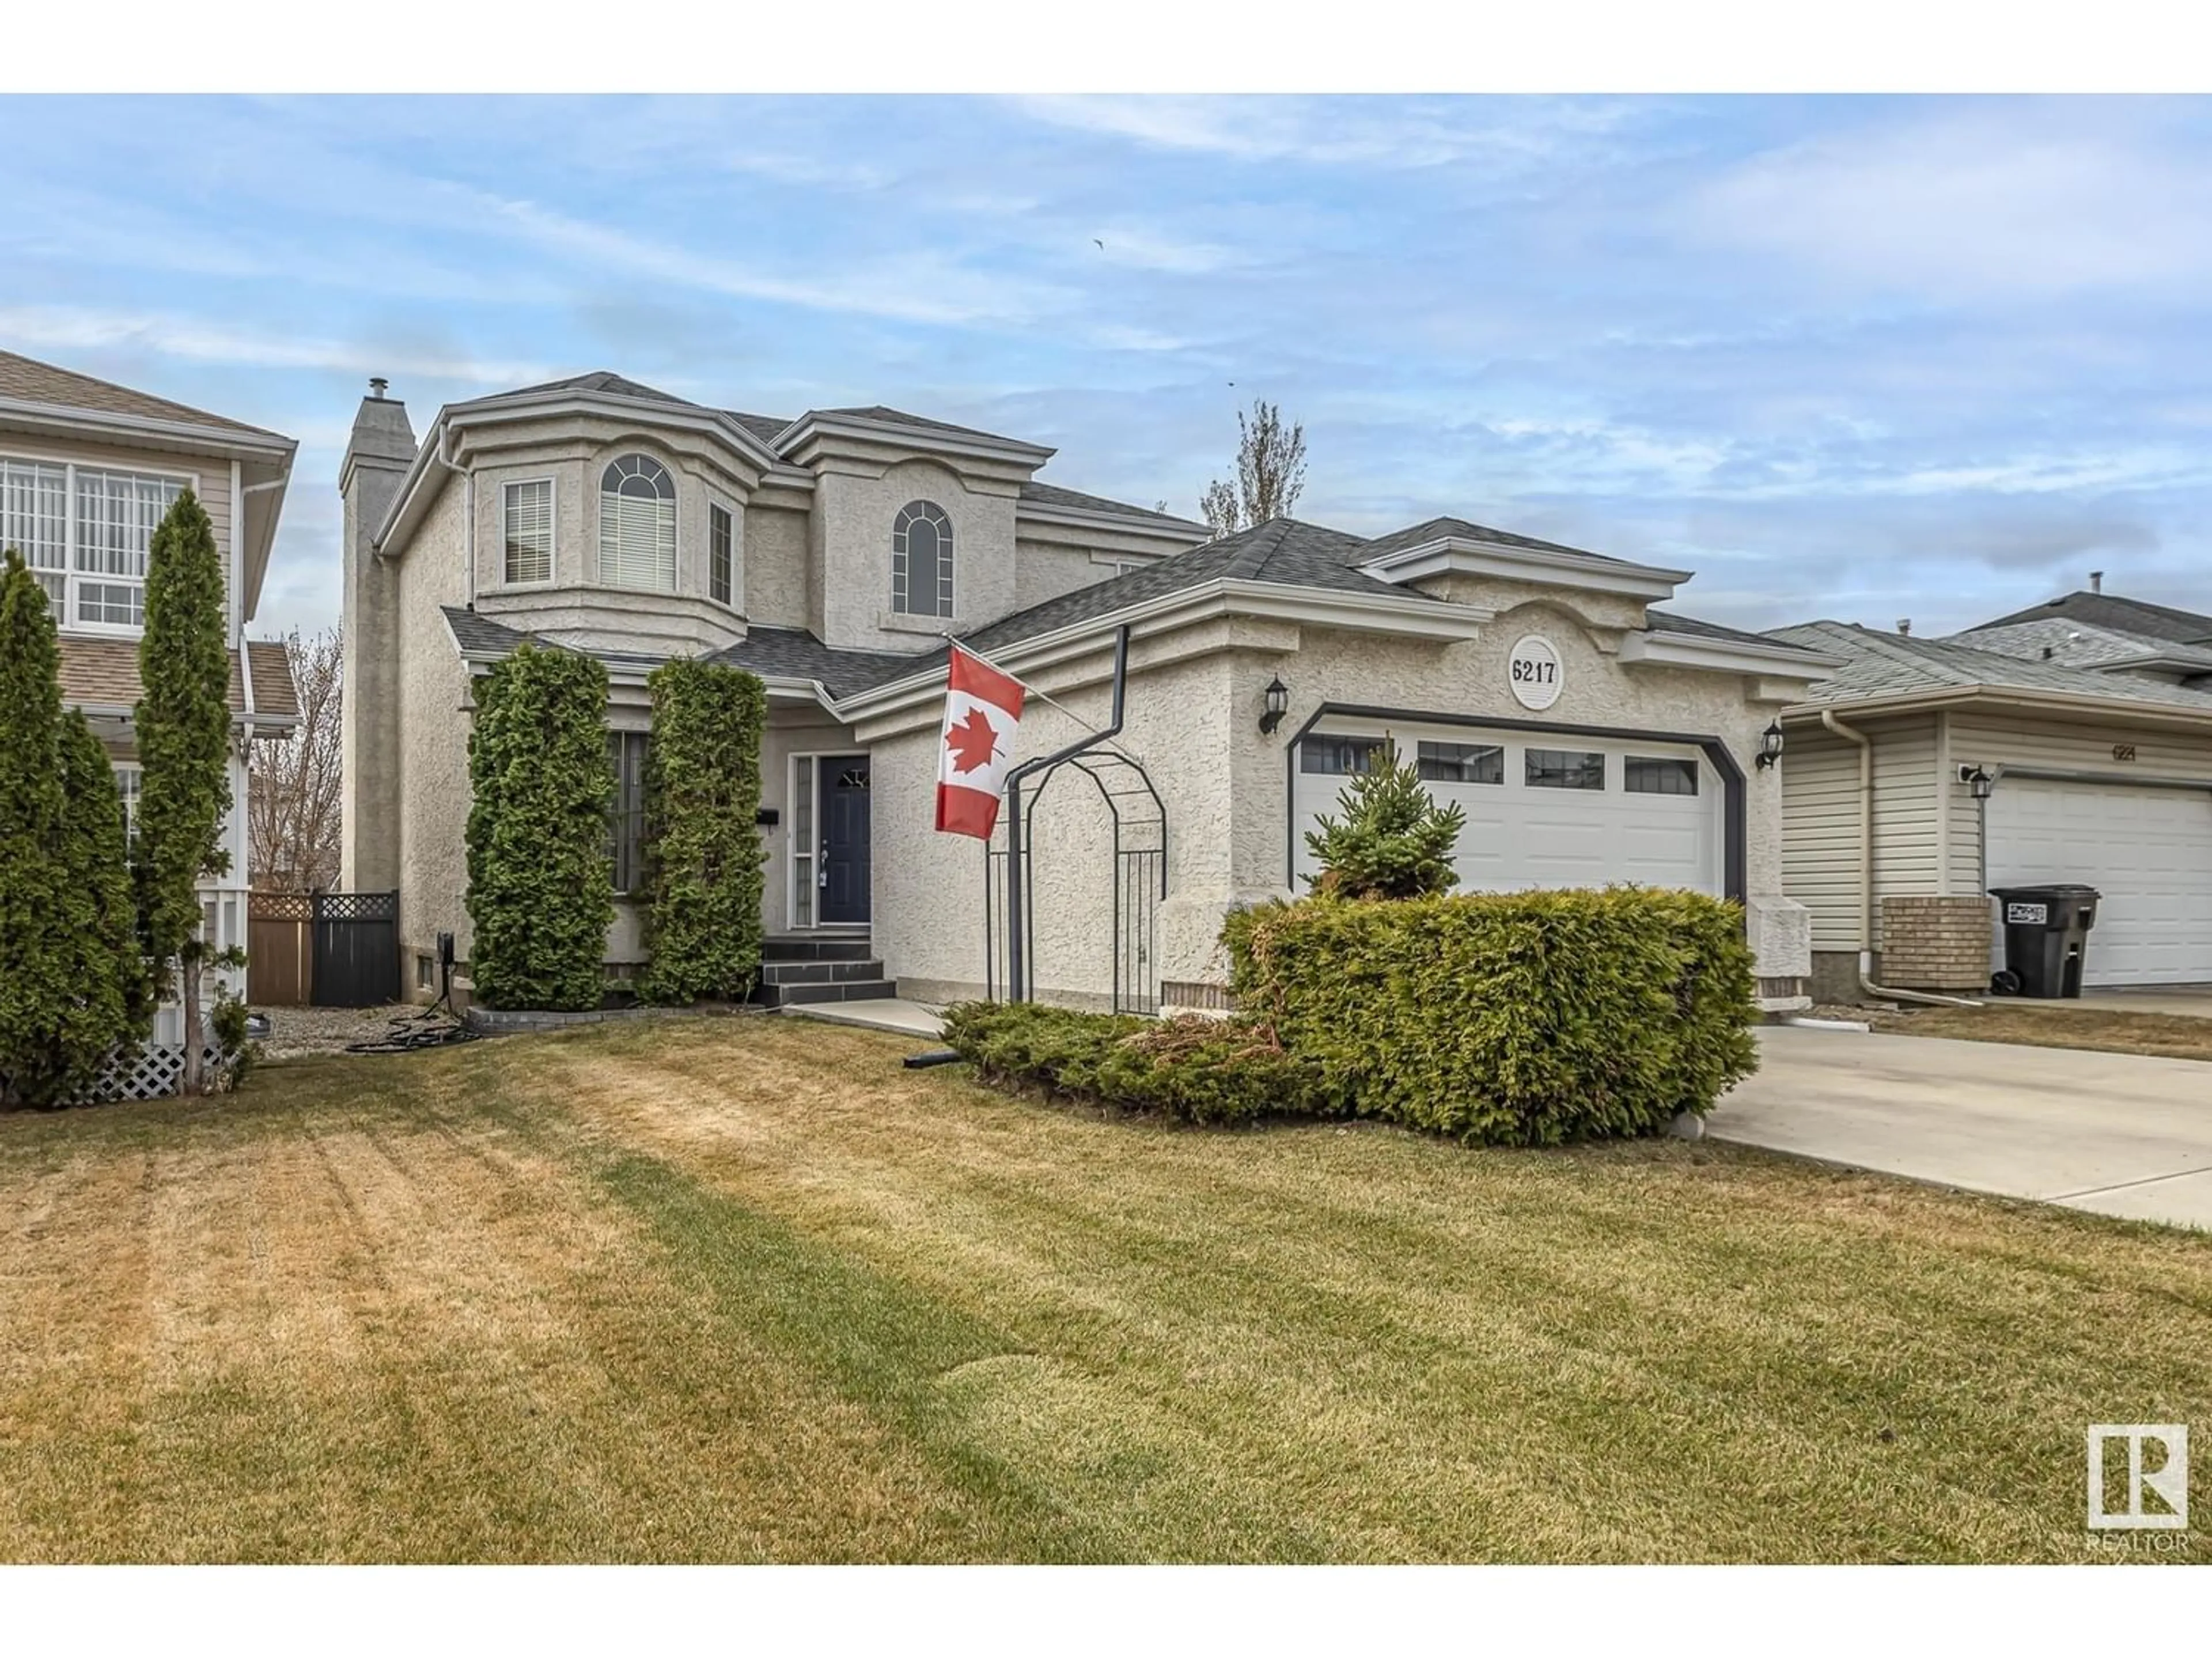 Frontside or backside of a home for 6217 159A AV NW, Edmonton Alberta T5Y2R9